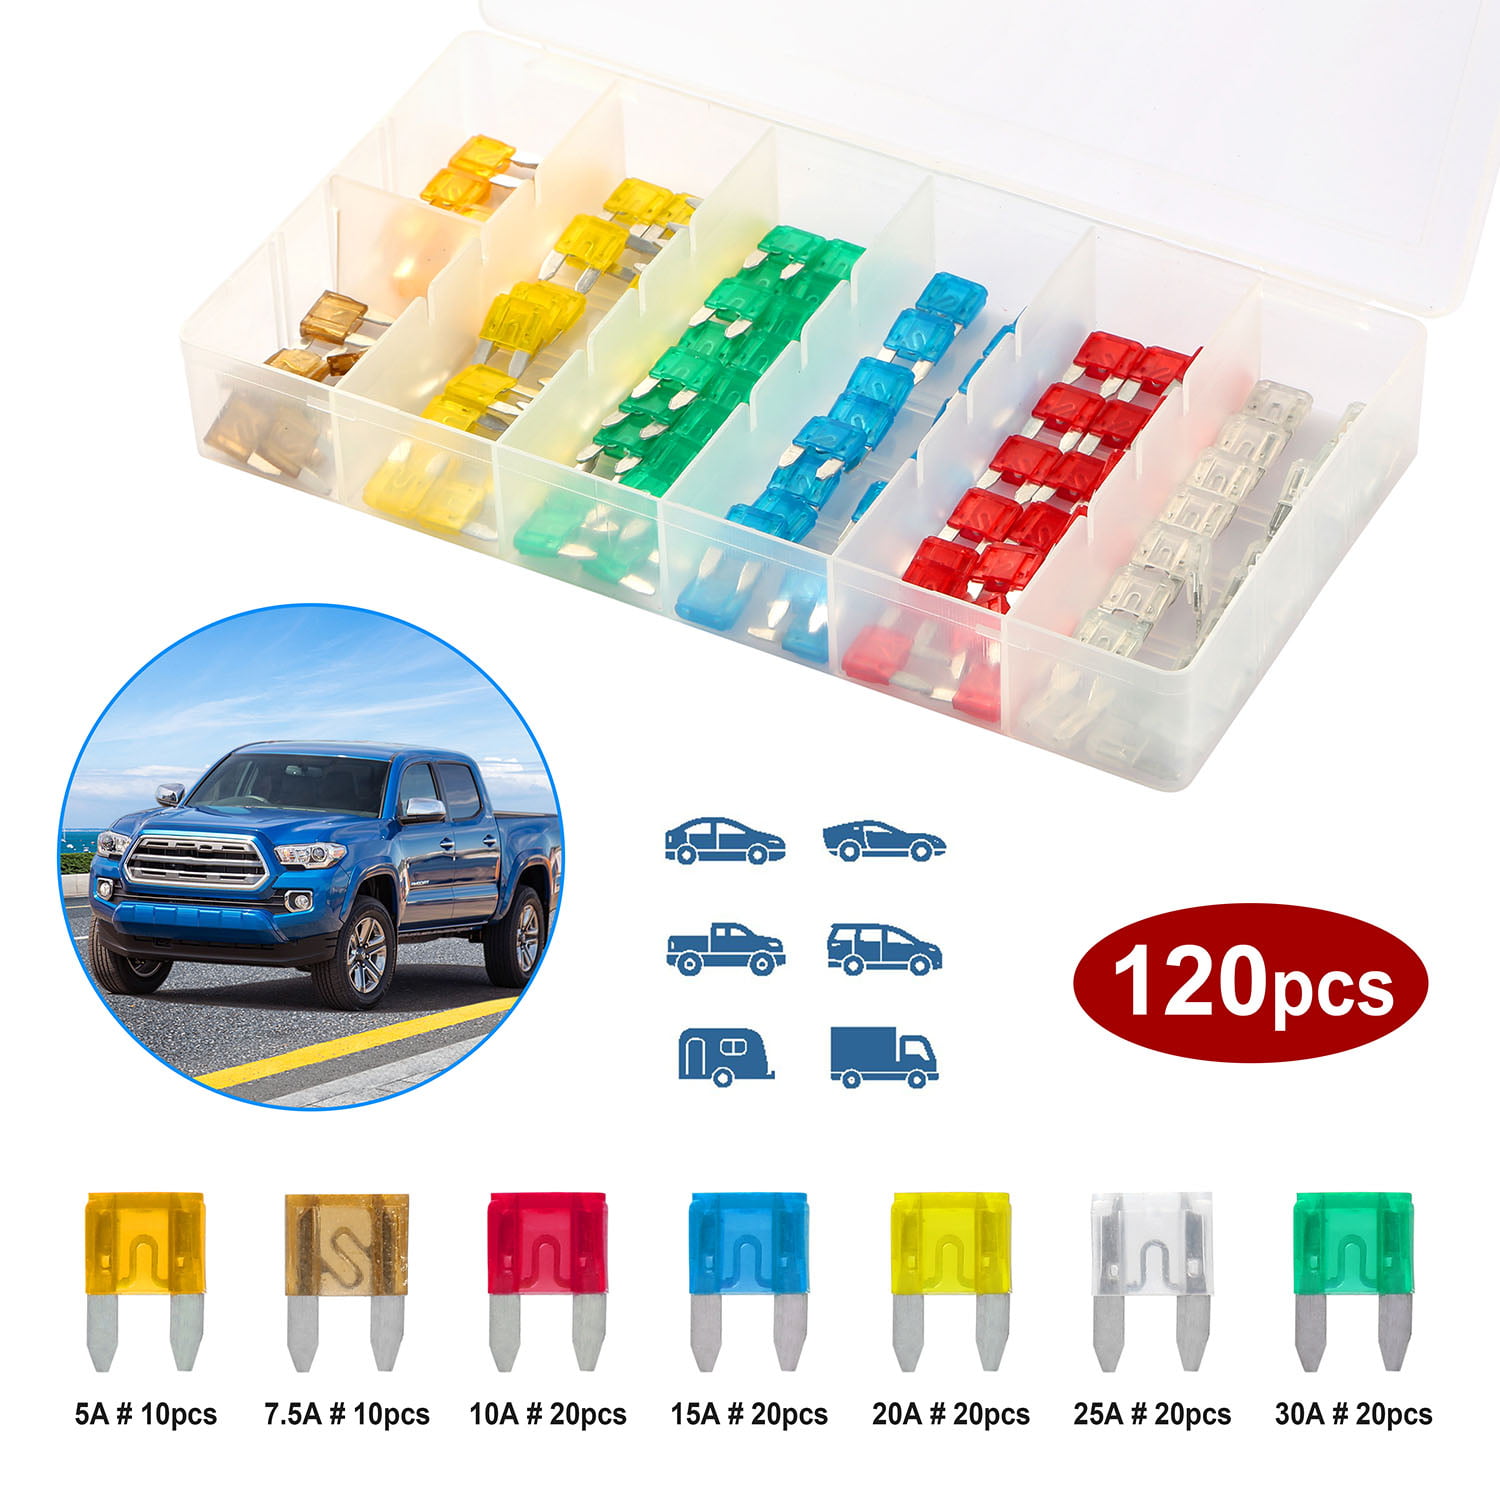 2A 3A 5A 7,5A 10A 15A 20A 25A 30A 35A 40A Komake 311 Pieces of Car Fuses Car Fuses Set for Car Trucks with Storage Case with 1 Fuse Extractor Standard and Mini Flat Fuses